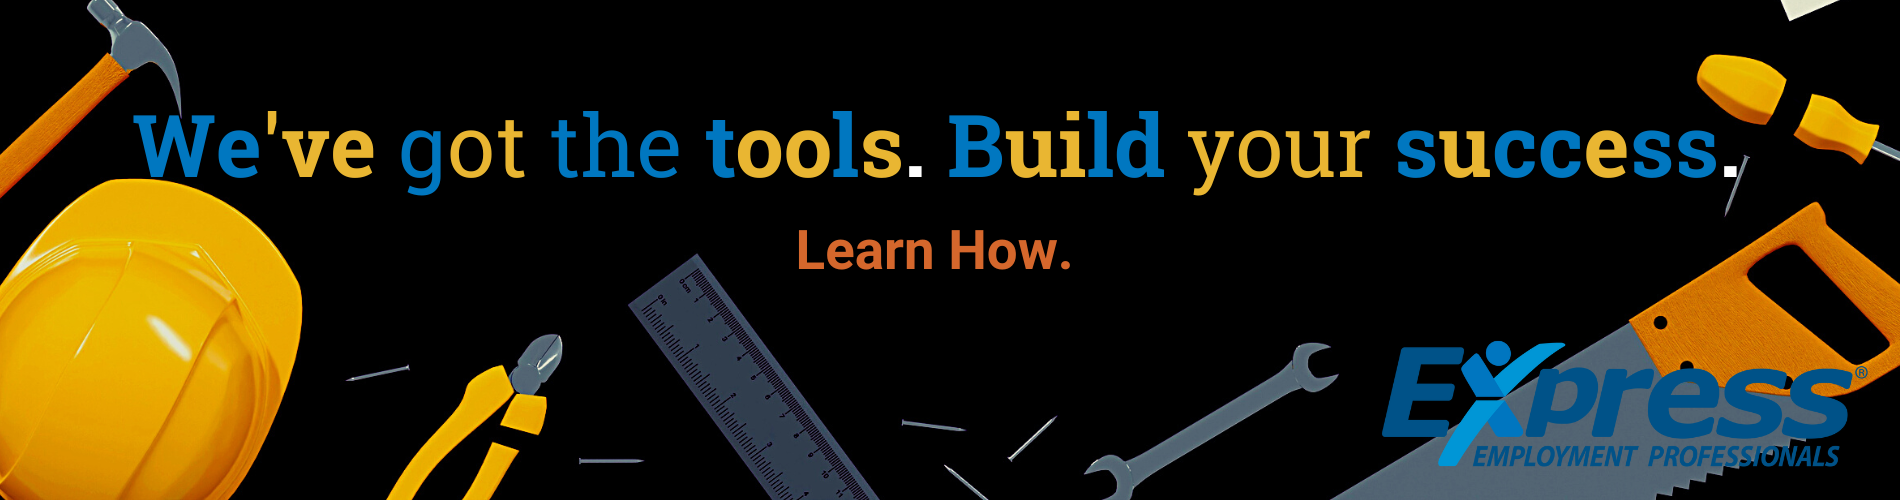 Tools for Success Banner